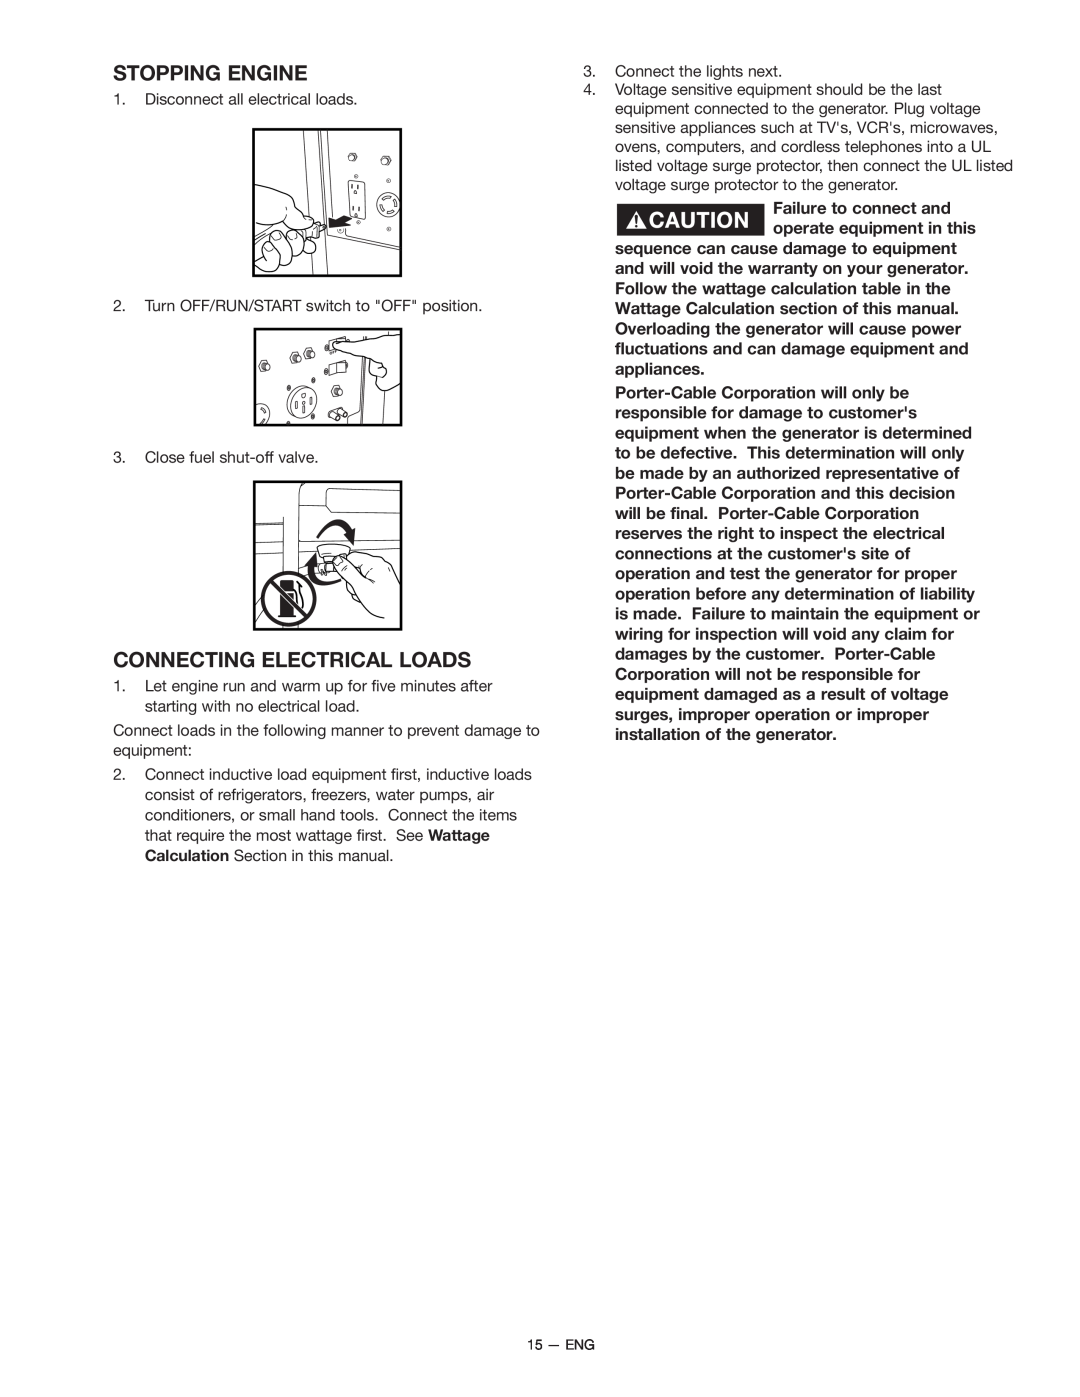 Porter-Cable H1000 instruction manual Stopping Engine, Connecting Electrical Loads 